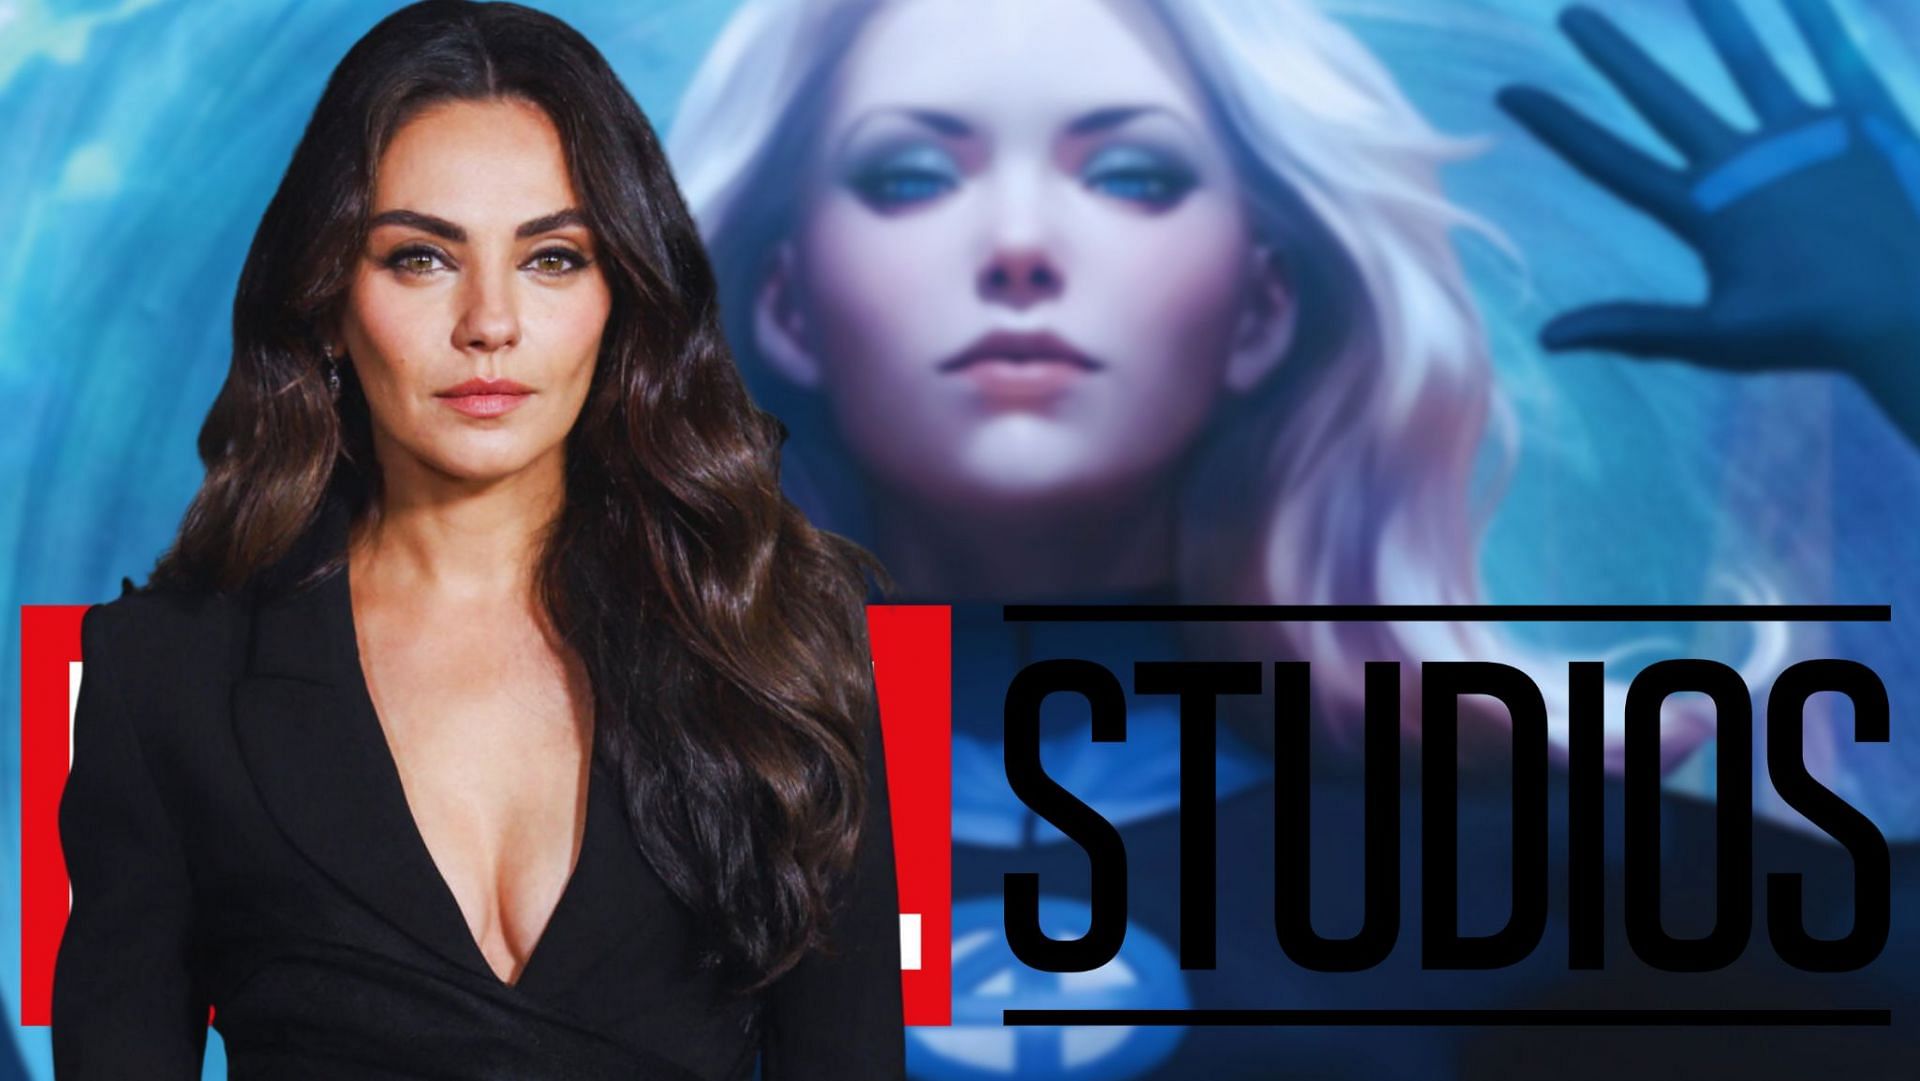 Mila Kunis addresses rumors about her potential involvement in the MCU